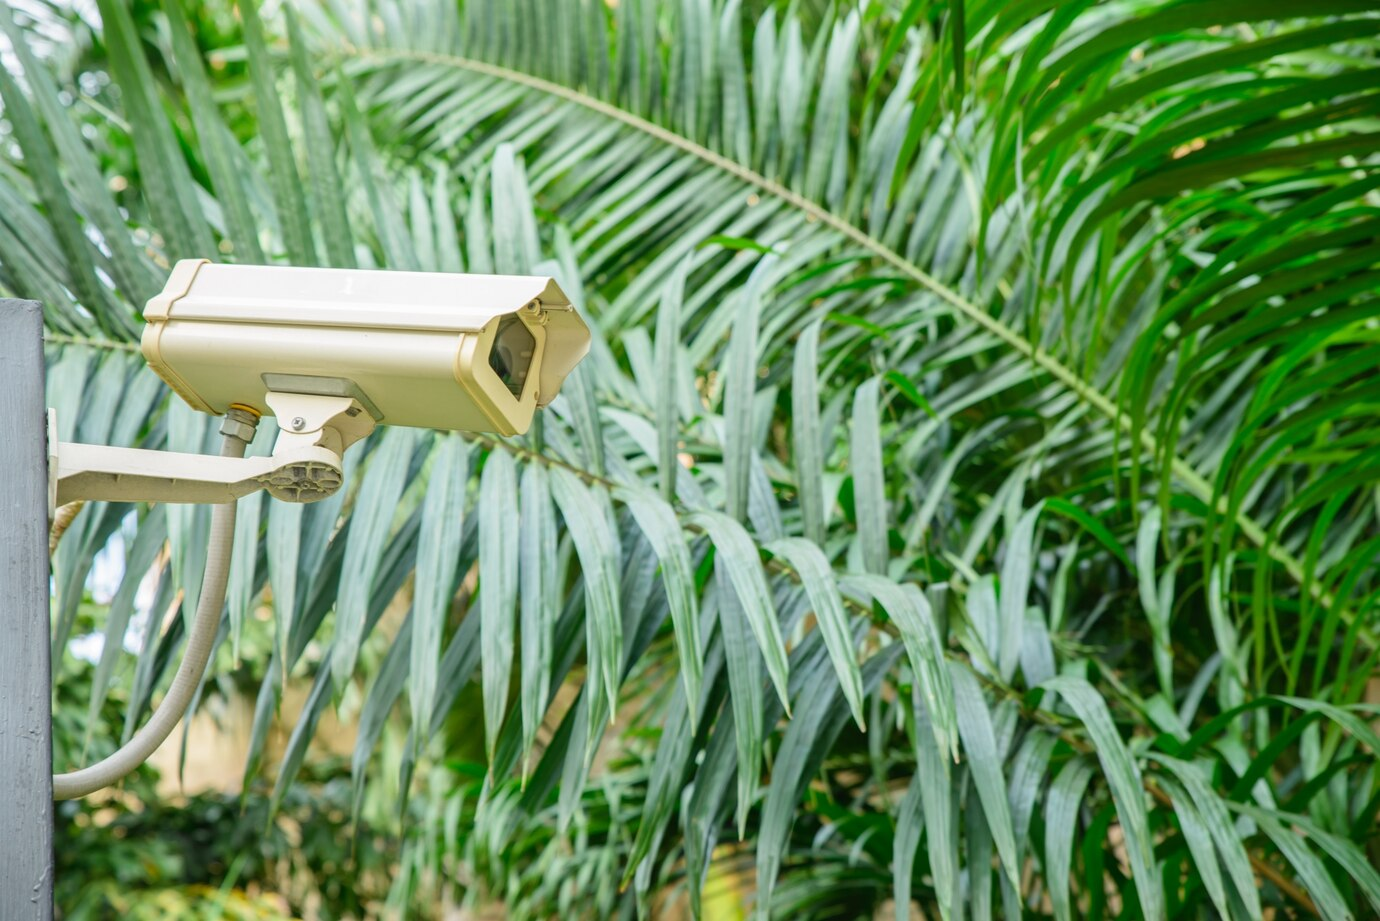 Choosing the Right CCTV Camera: Essential Features for Optimal Security